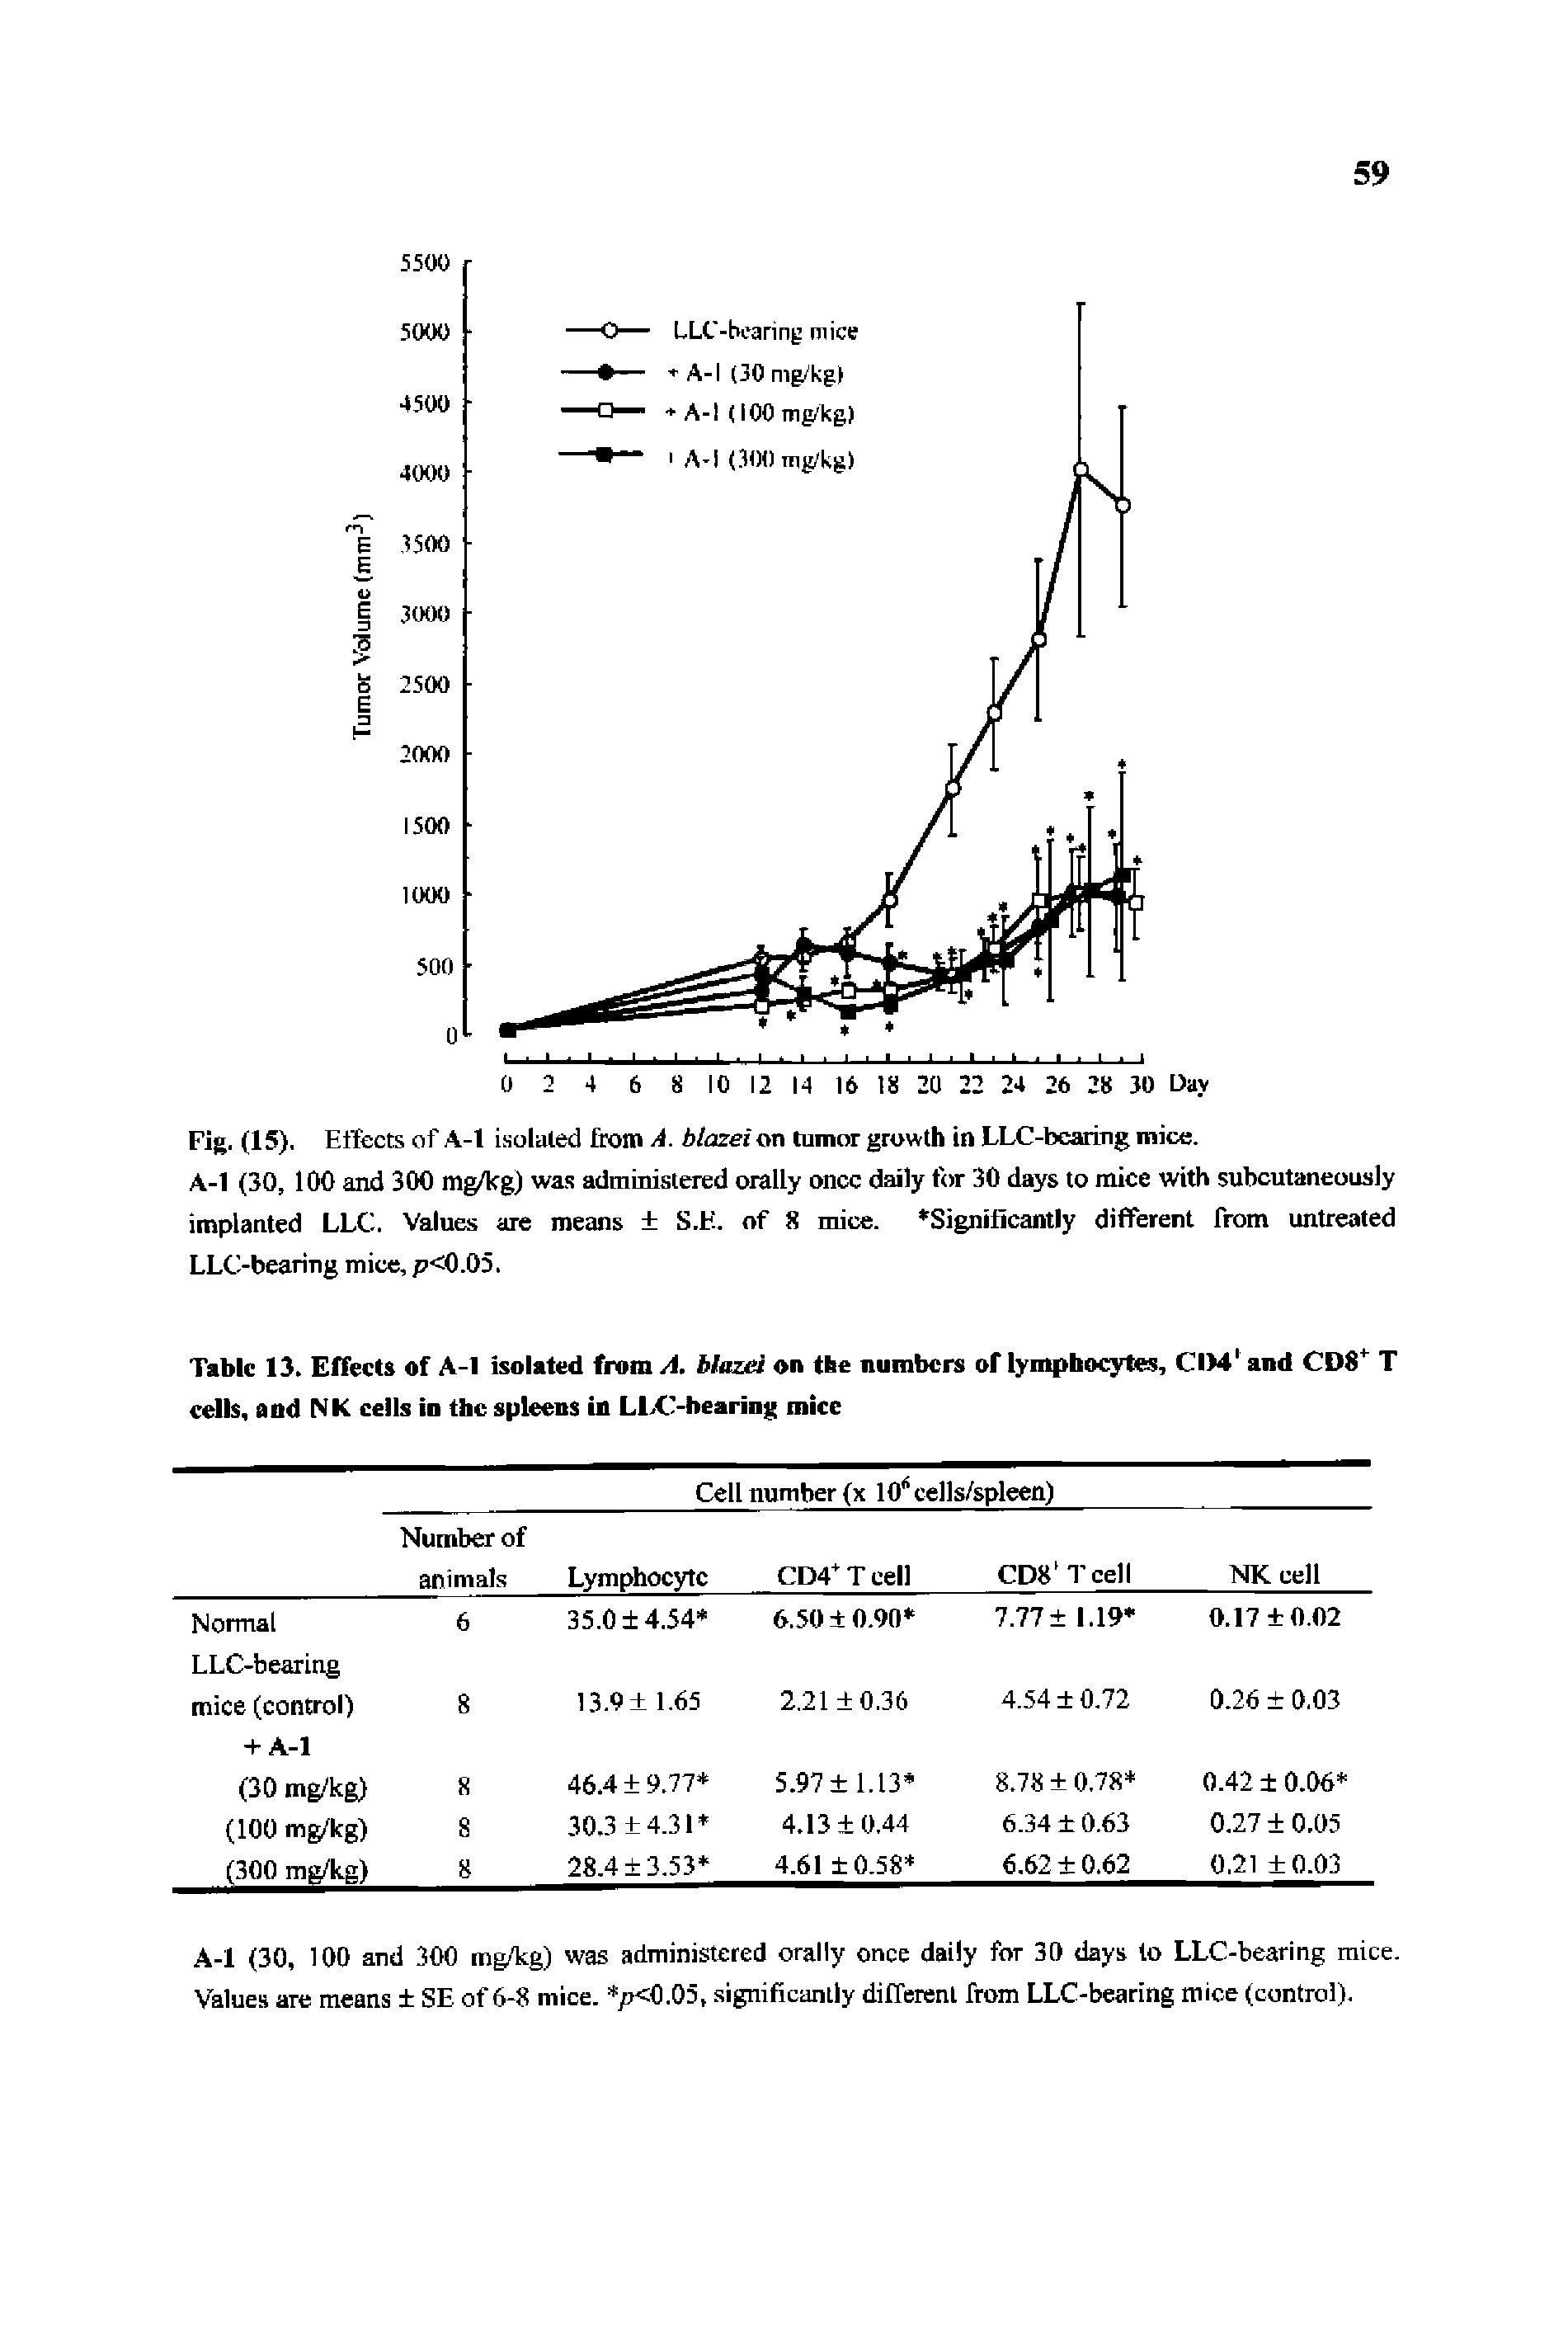 Table 13. Effects of A-1 isolated from A. blazei on the numbers of lymphocytes, CIM and CD8 T cells, and NK cells in the spleens in LLC-bearing mice...